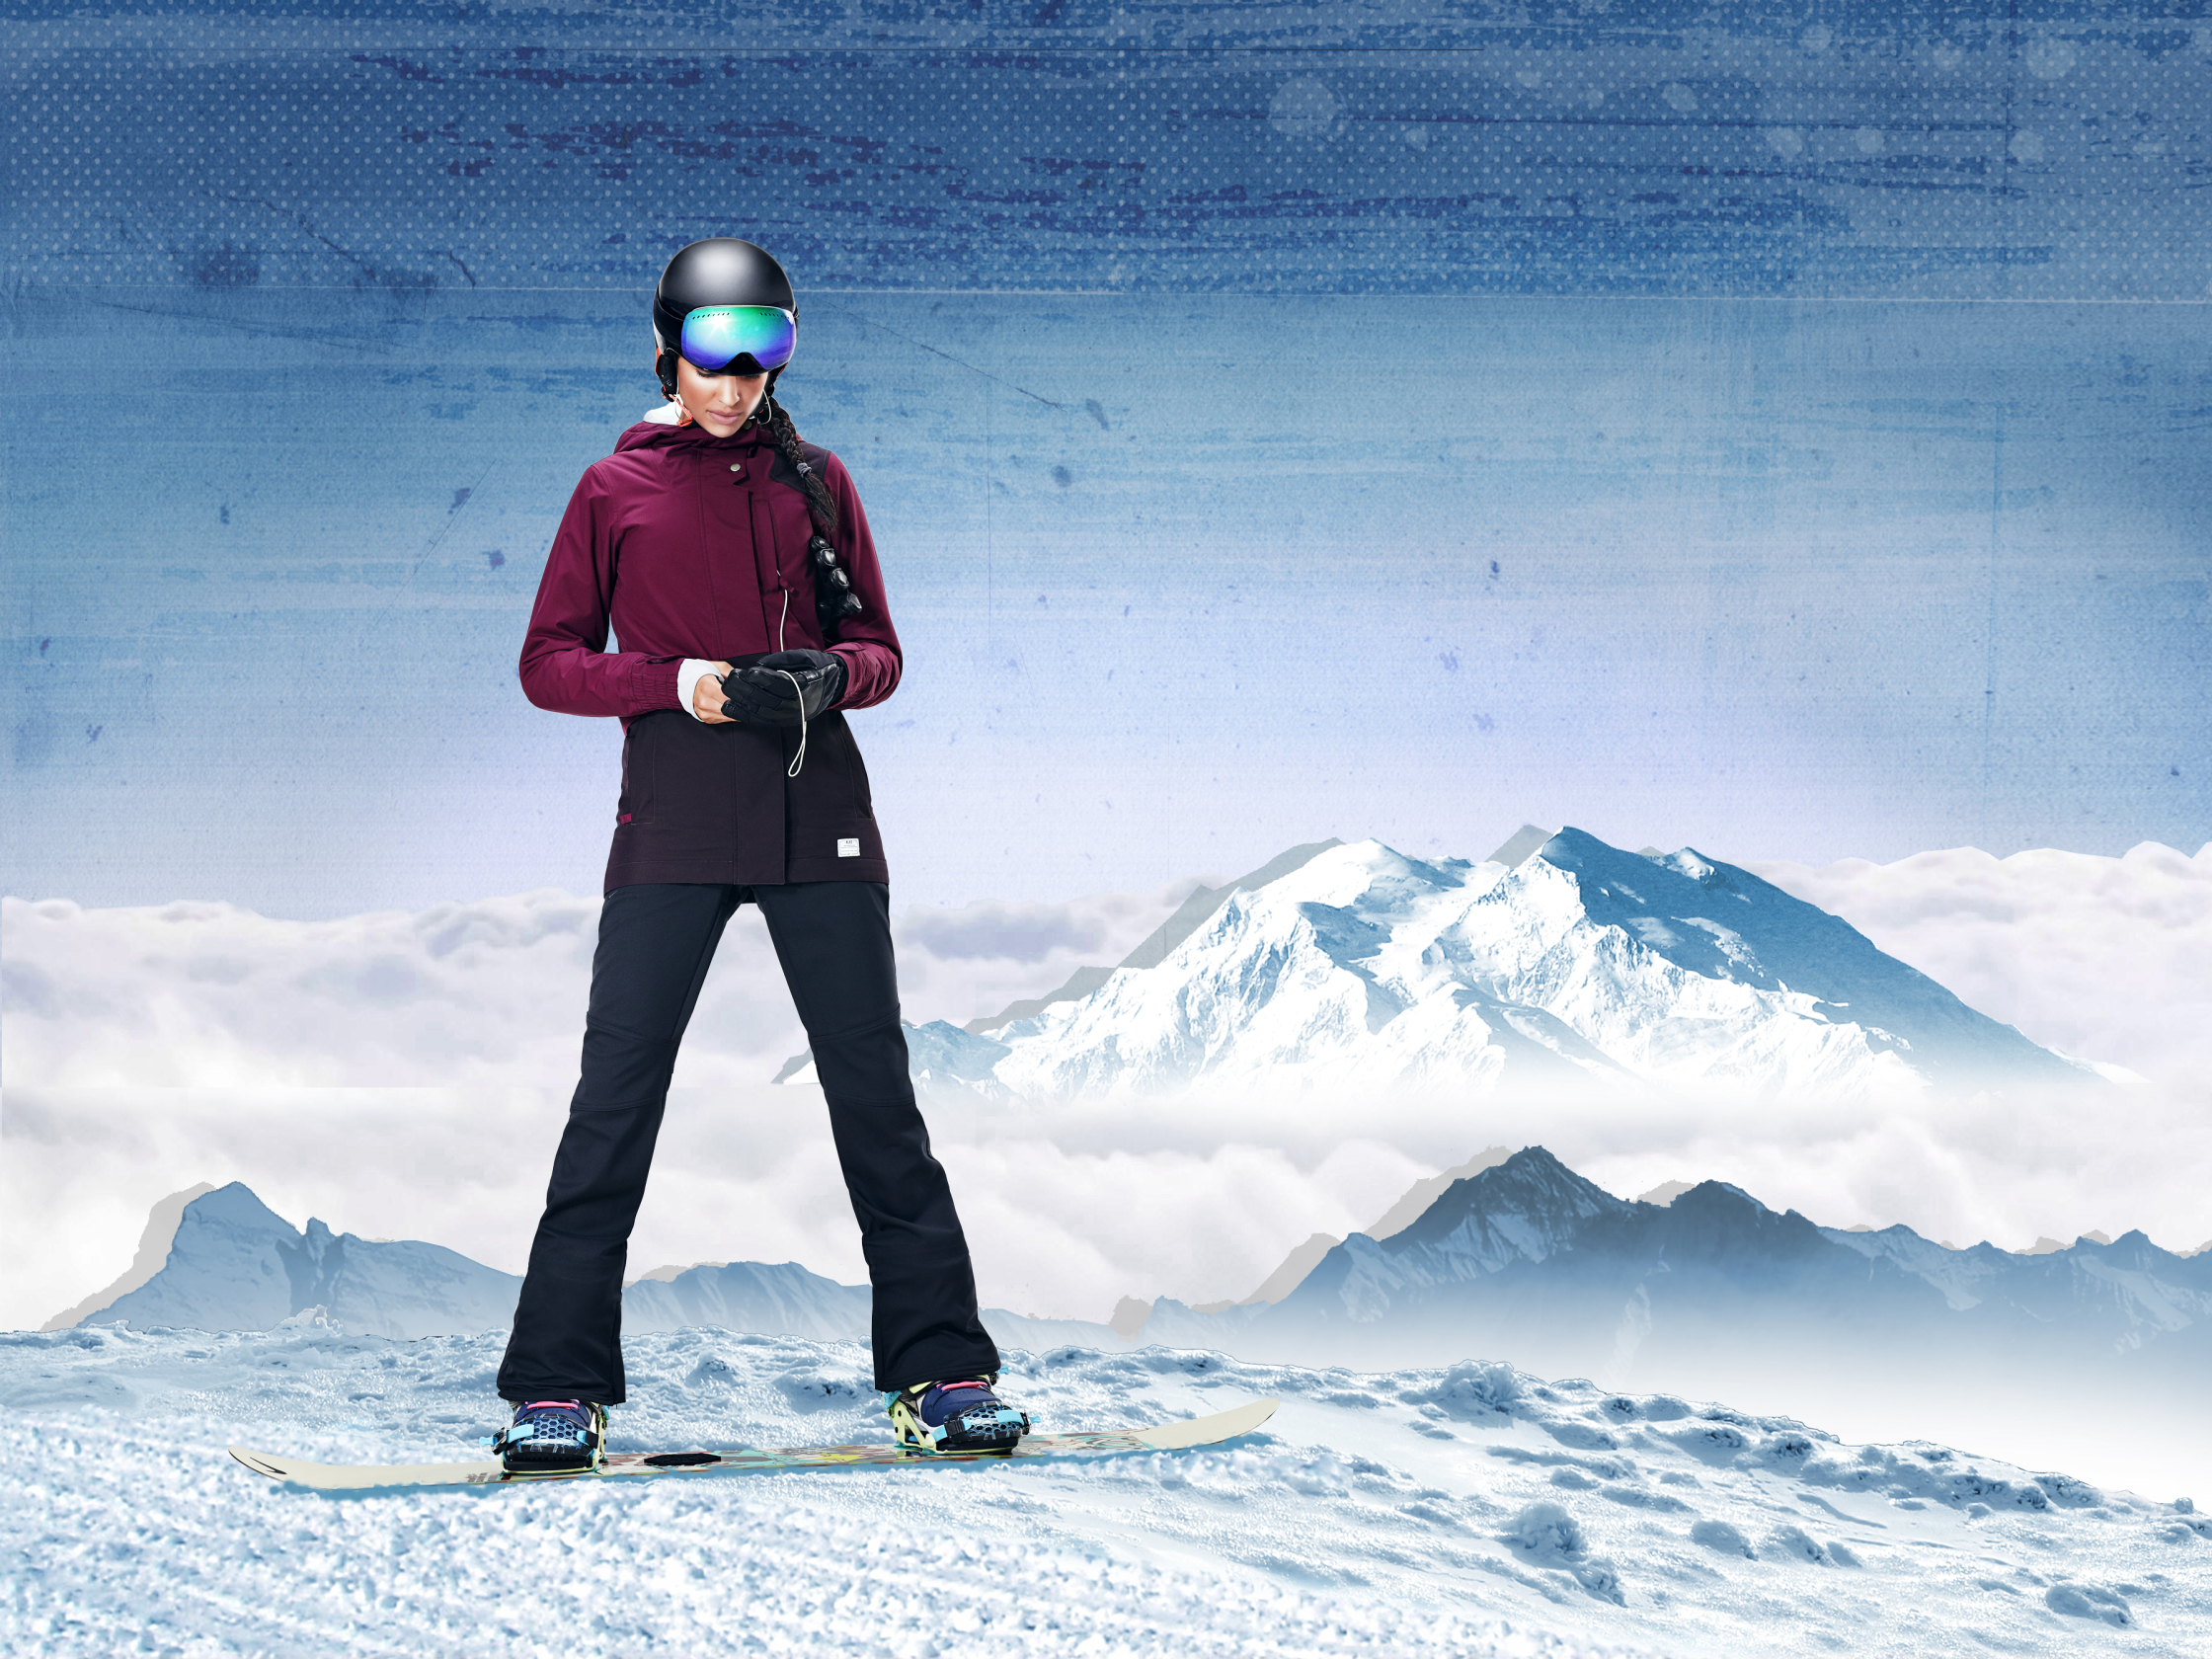 Defy the Elements Snowboarding Mountains Nike